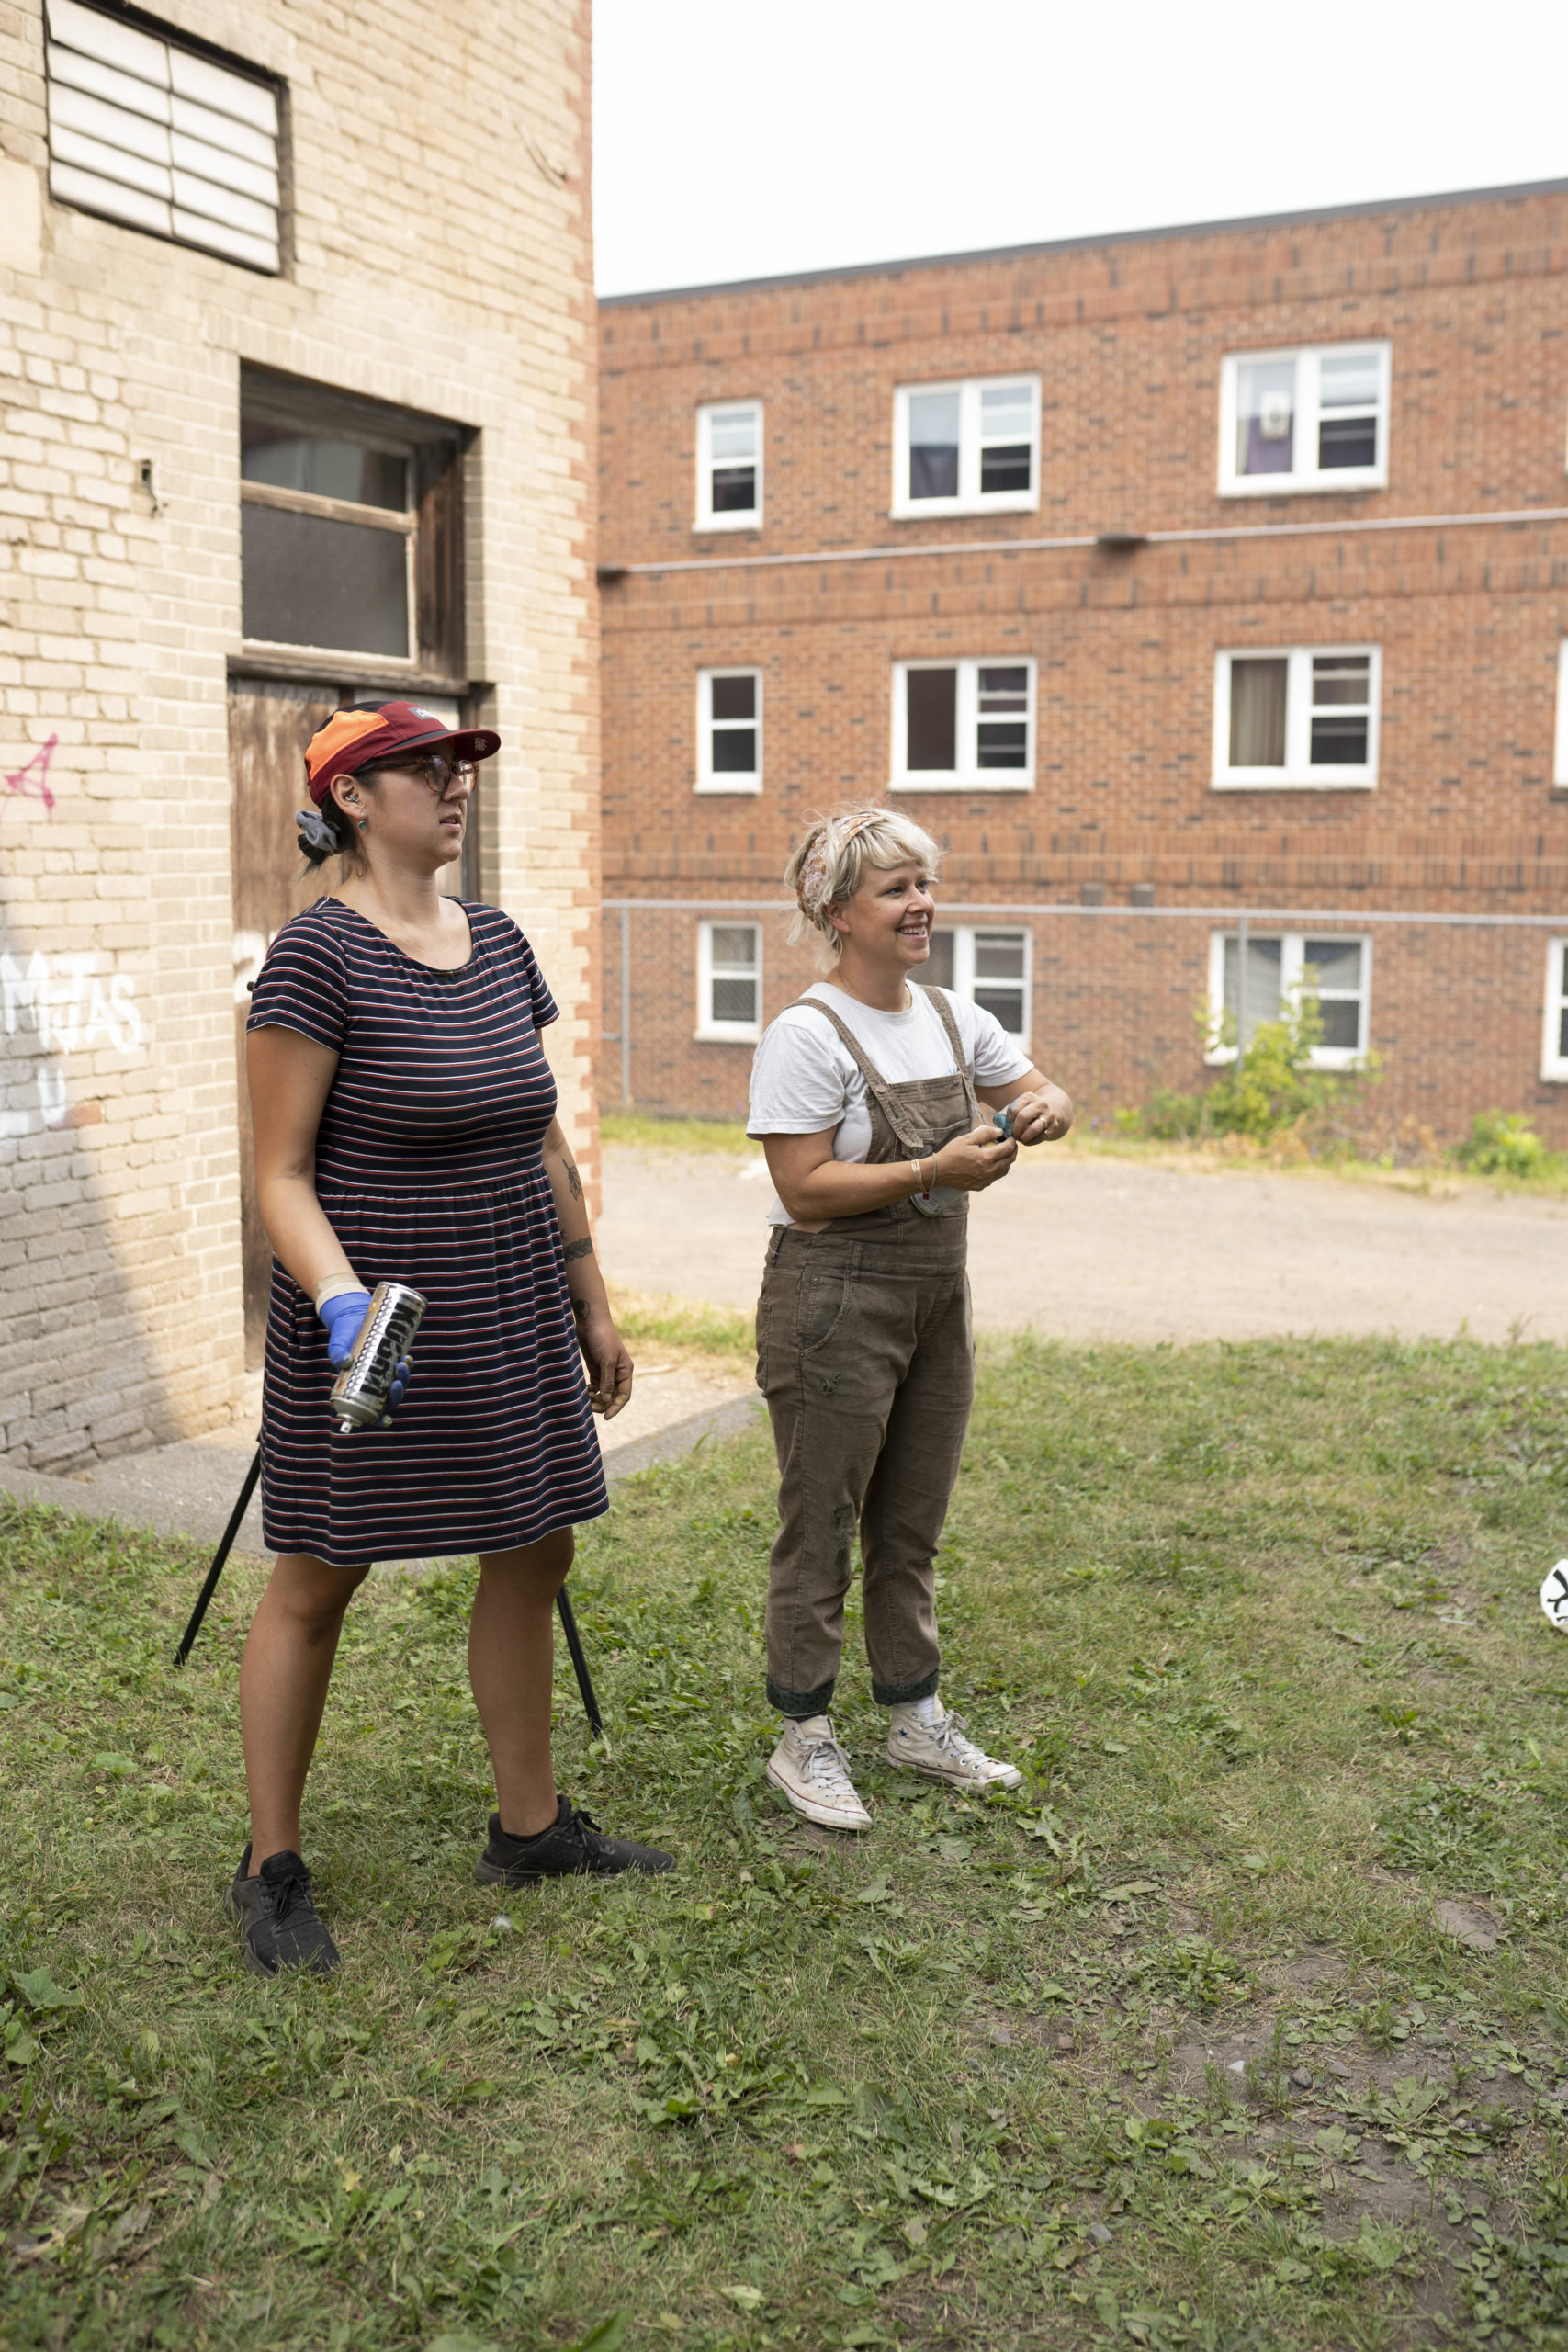 Photo of artist Shelby Gagnon and her artist mentor Lora Northway, they are smiling and looking at their mural. They are standing on green grass and two brick buildings are in the background.